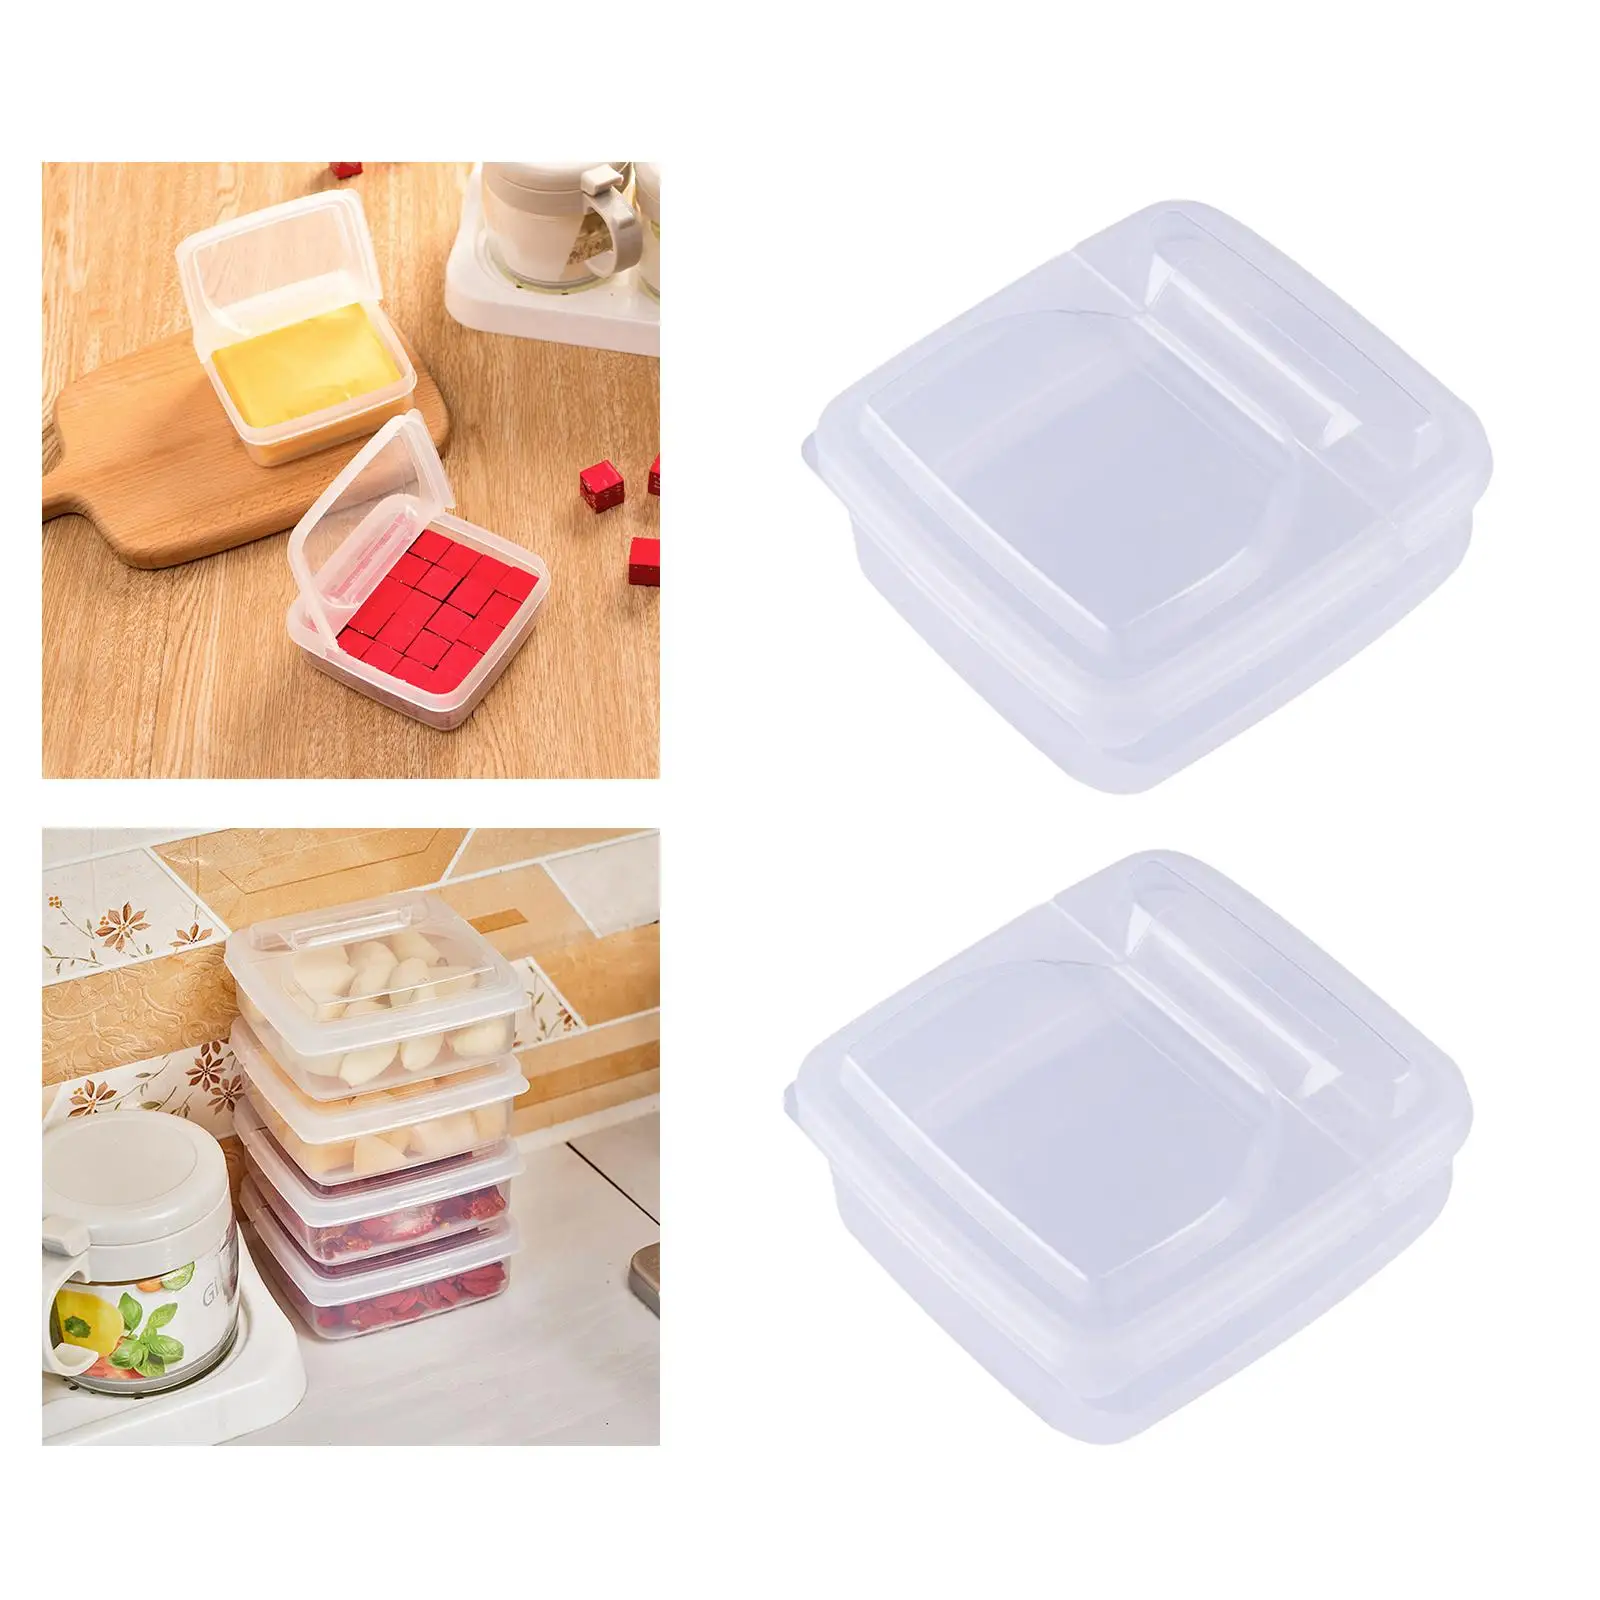 2Pcs Compact Refrigerator Container with Flip Lid Freezer Drawers Bins Clear Cookie Holder